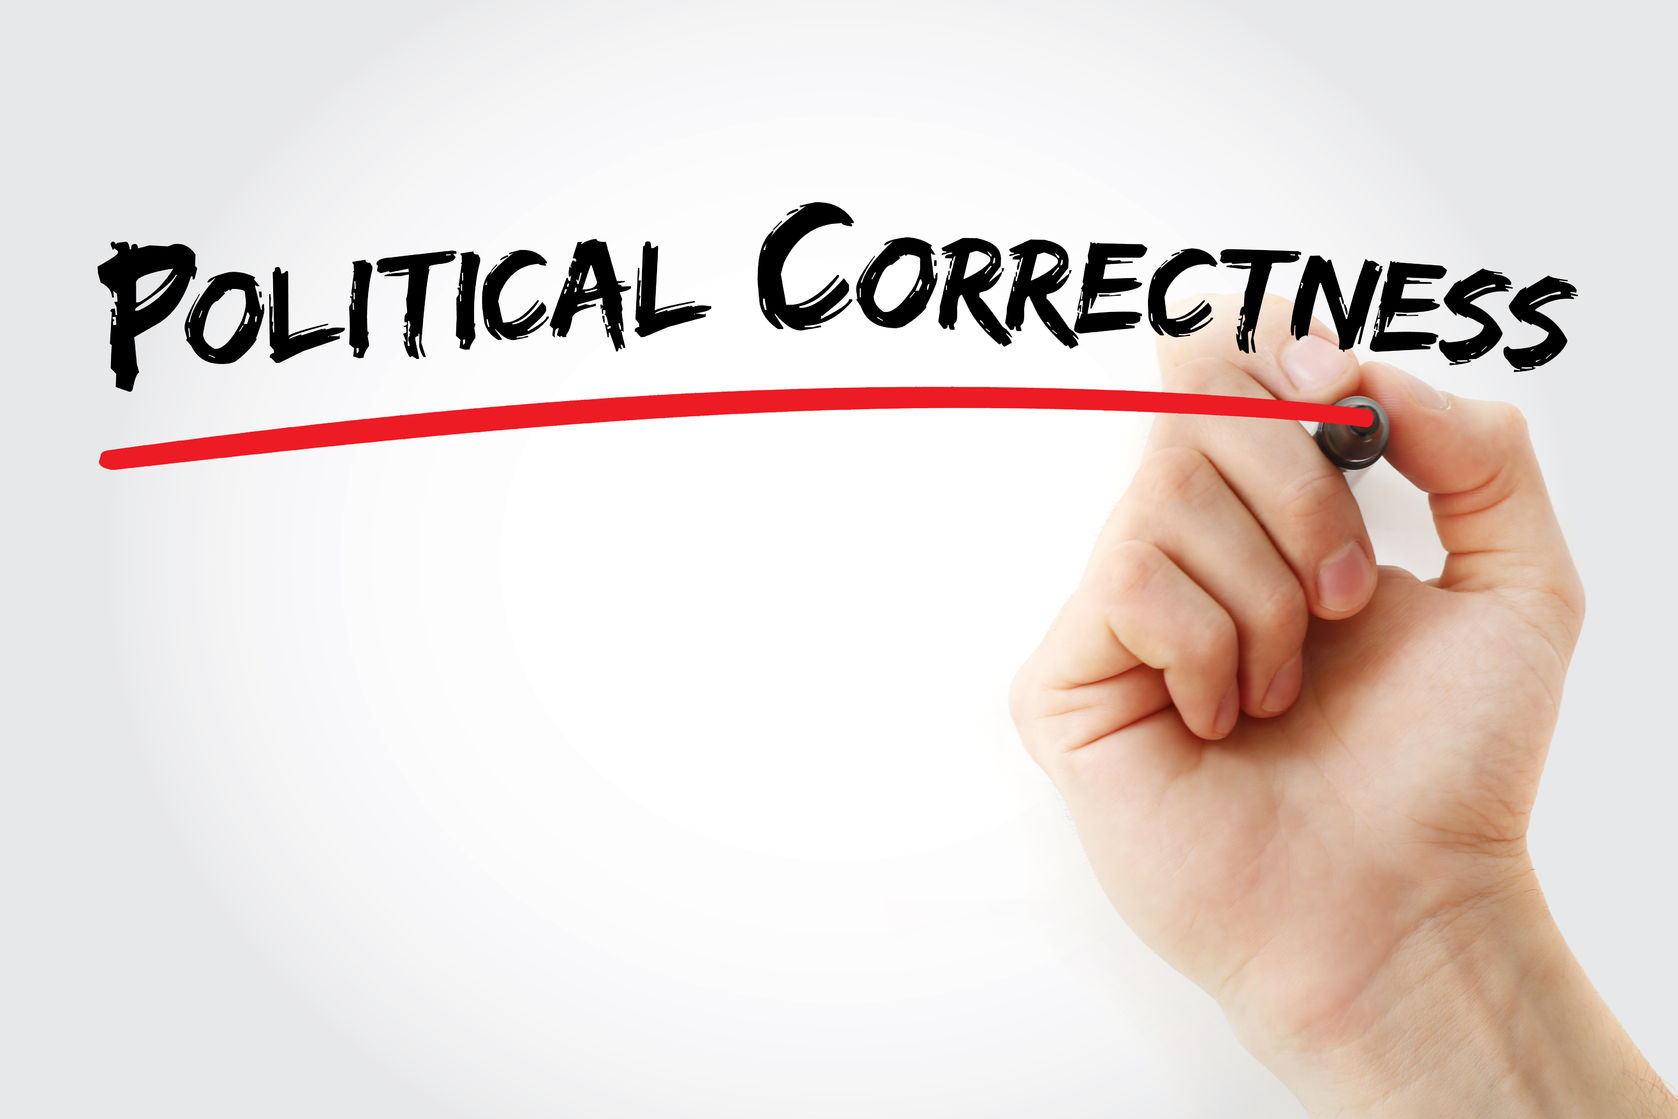 Political Correctness is the flavor of the day